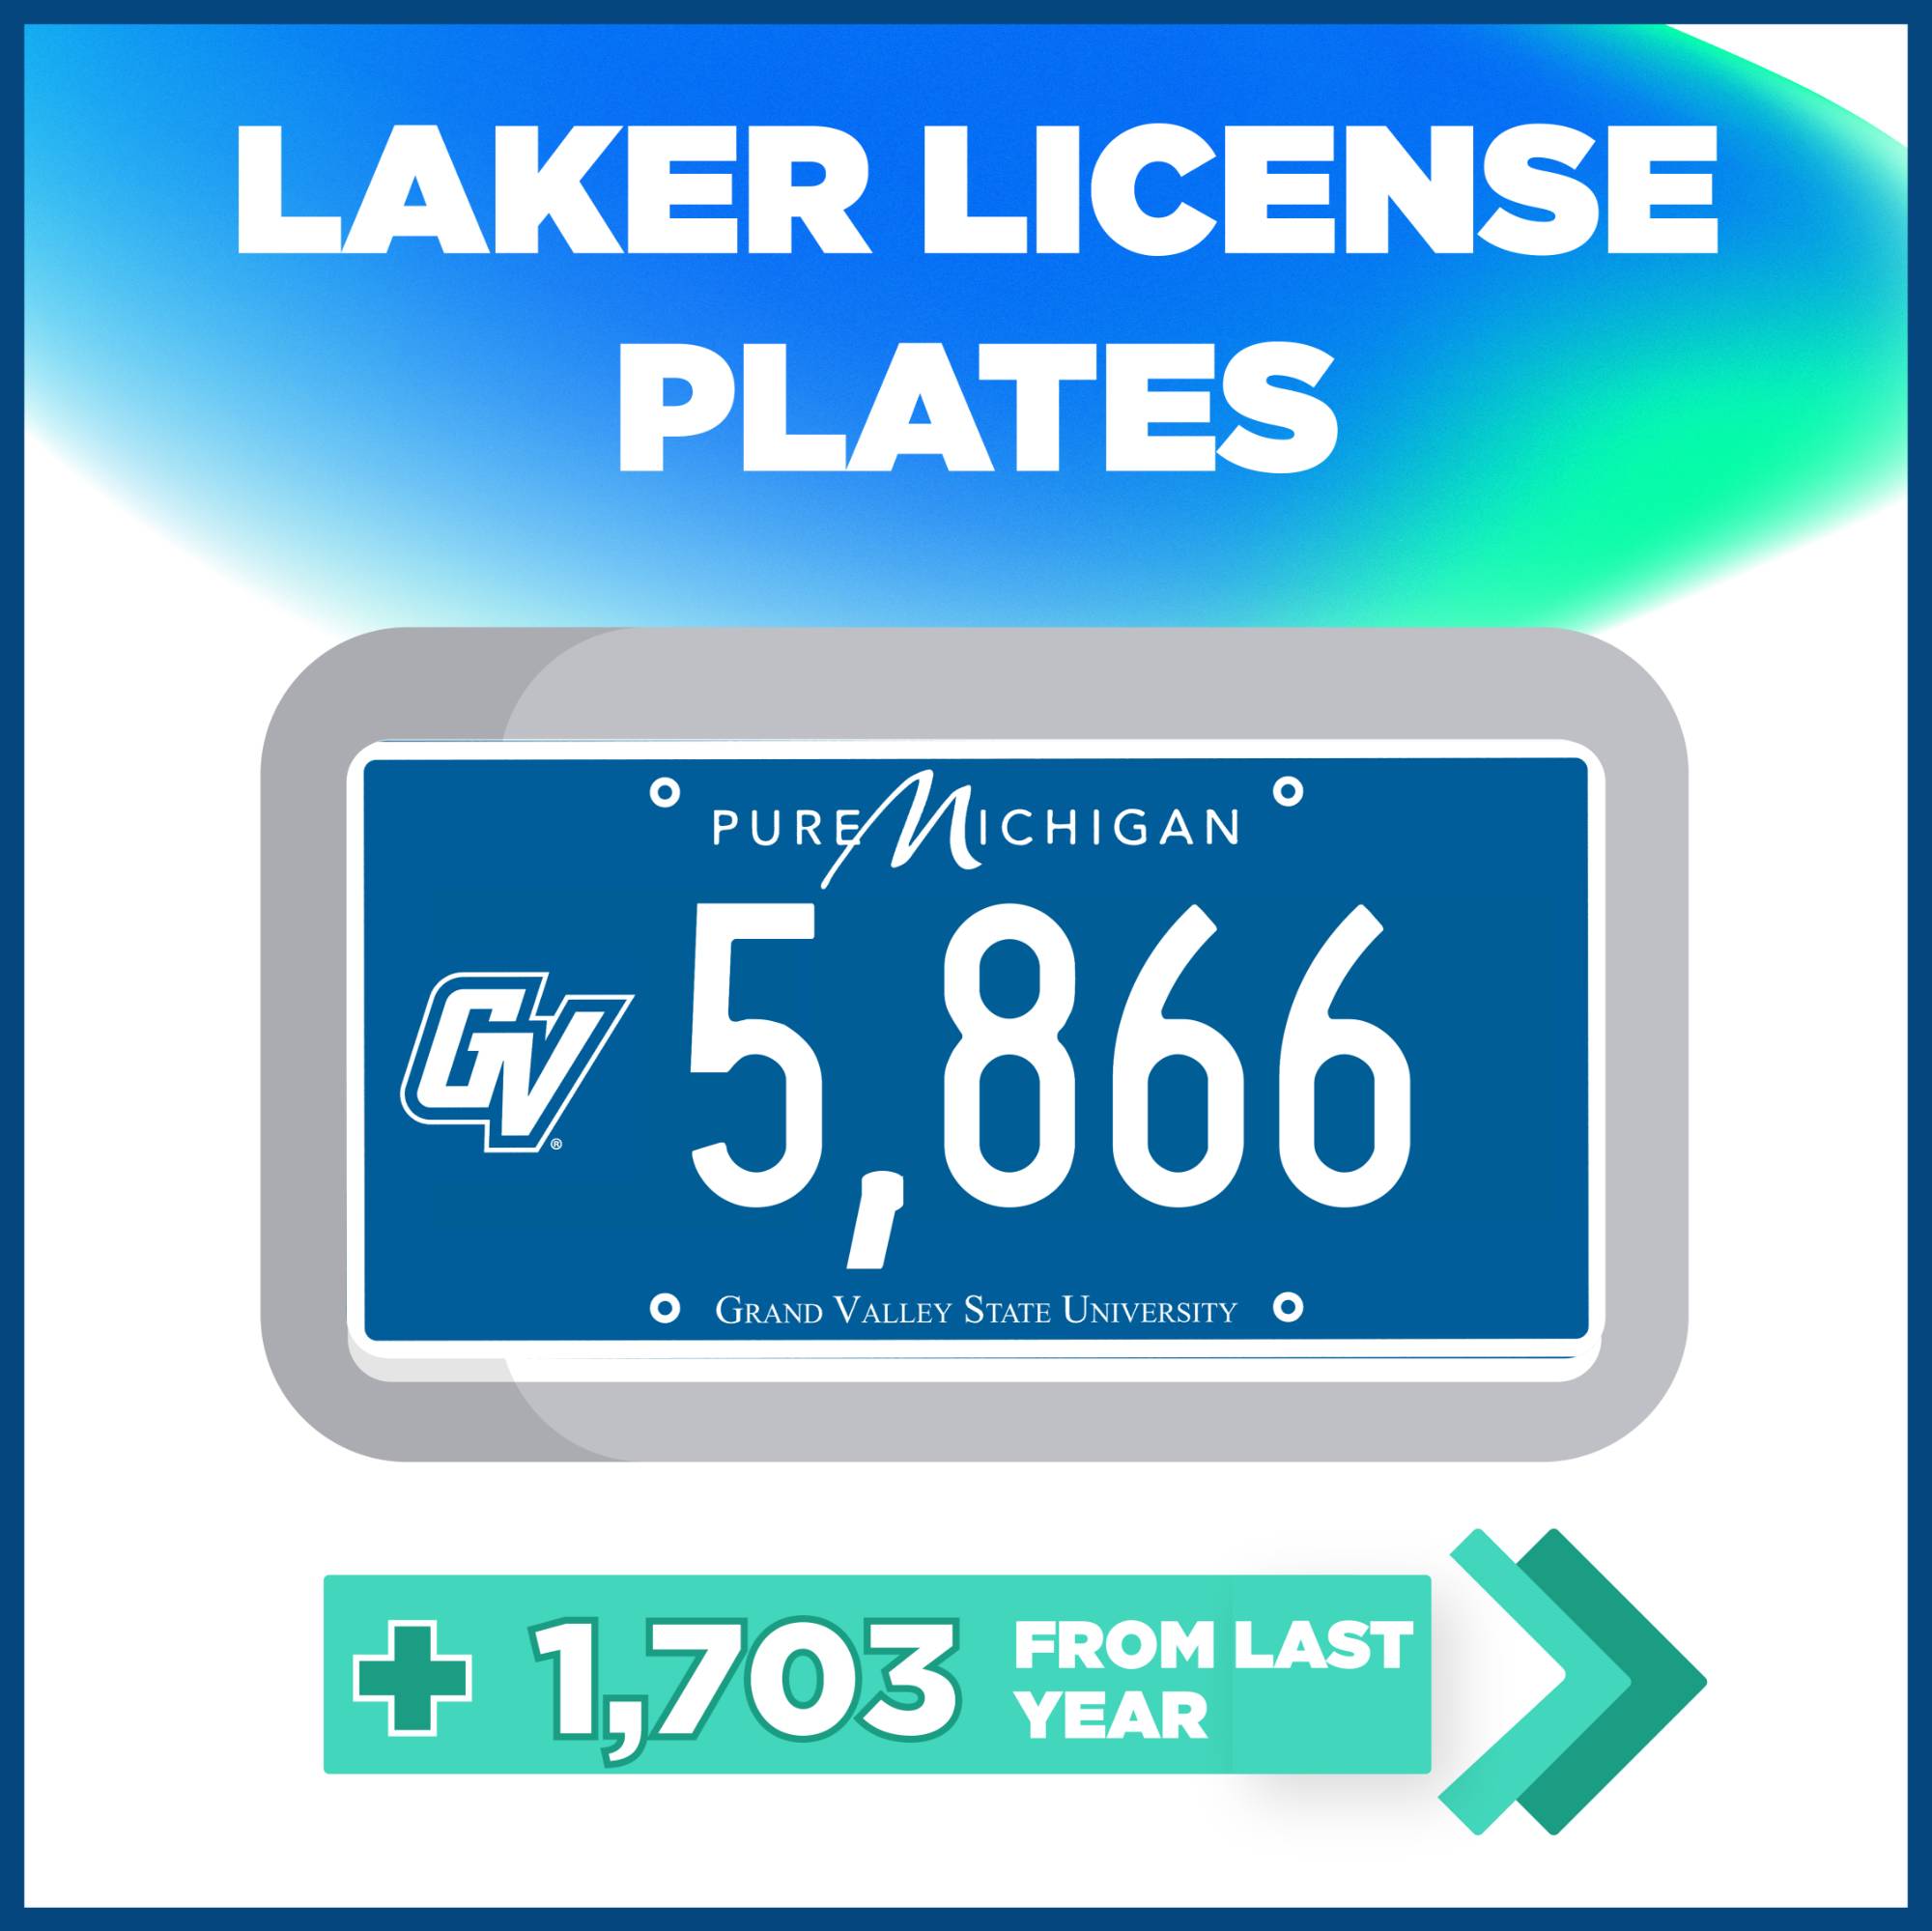 There are a total of 5,866 Laker License Plates on the road. This number increased by 1,703 in the past year.